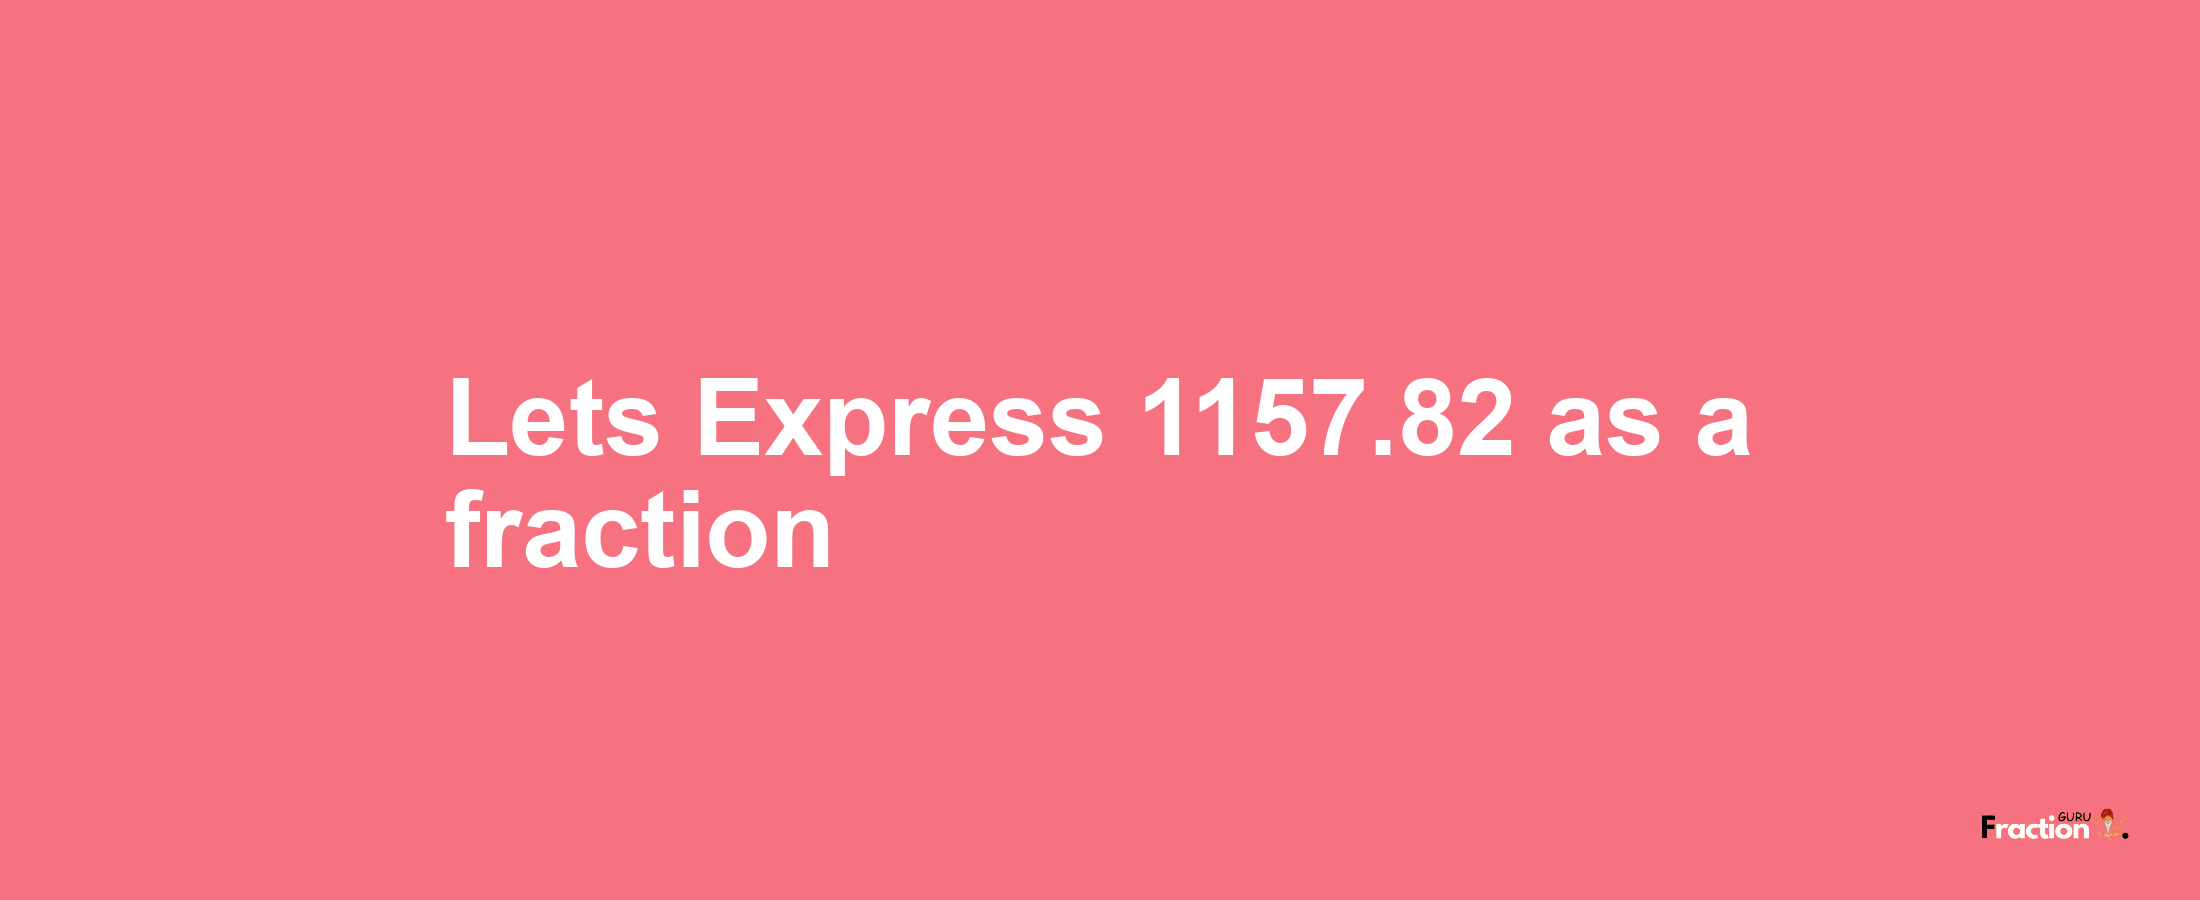 Lets Express 1157.82 as afraction